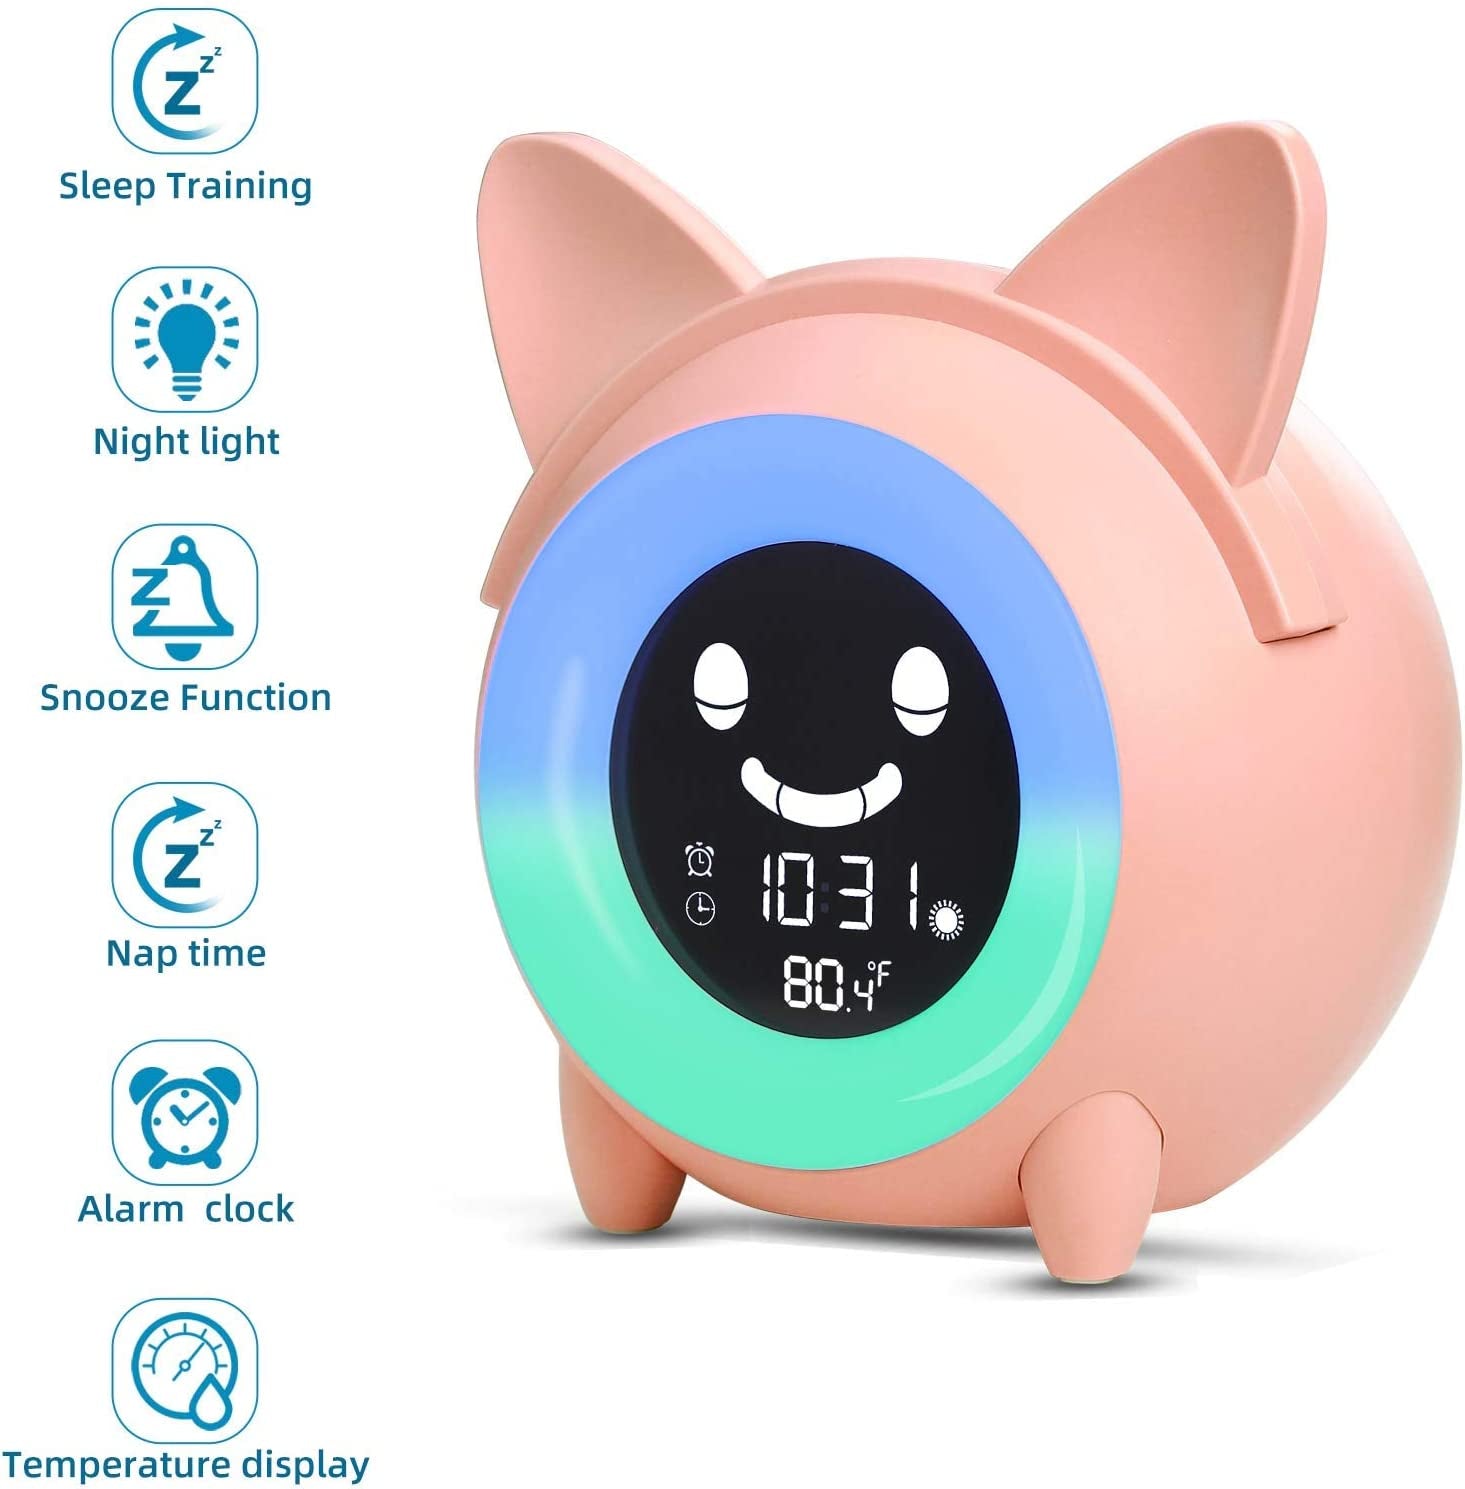 Kids Alarm Clock, Children'S Sleep Trainer, OK to Wake Clock for Bedroom Cute Digital Clock with Temperature, 5 Colors Smart Night Light Clock Teaching Boys Girls When to Wake up (Pink)